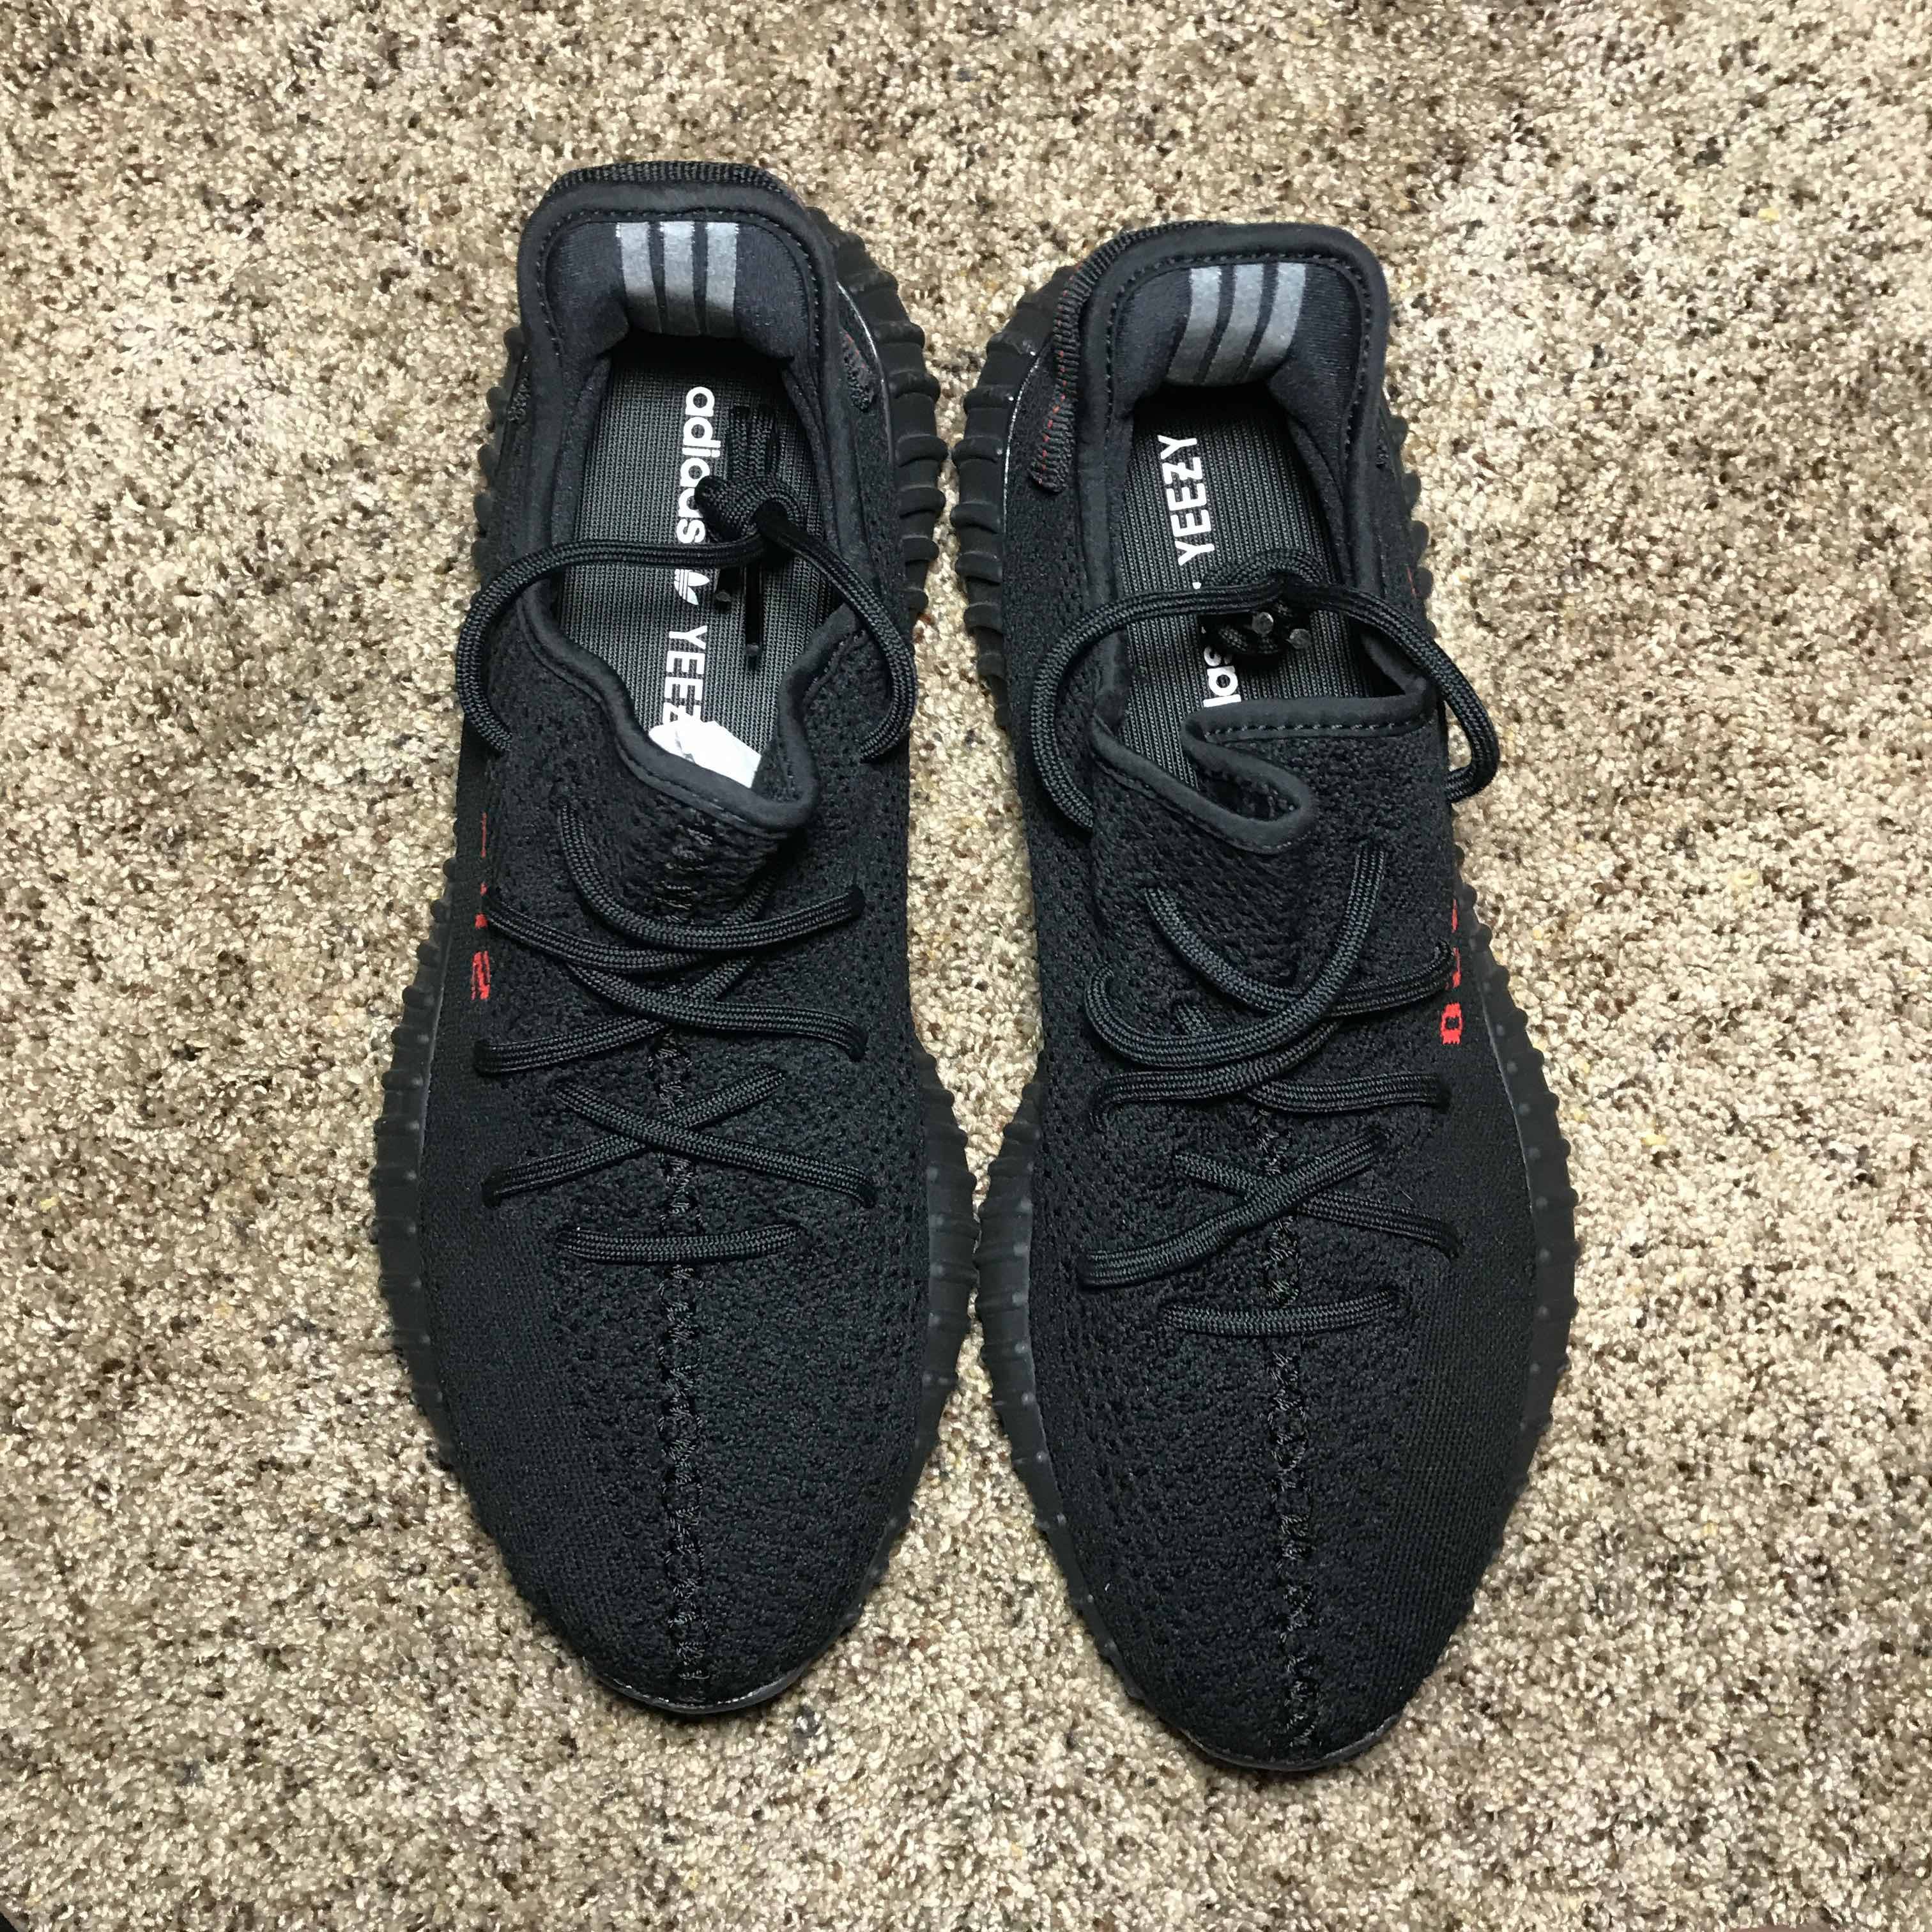 Cheap Adidas Yeezy Boost 350 V2 Black Reflective Ds Size 85 100 Authentic